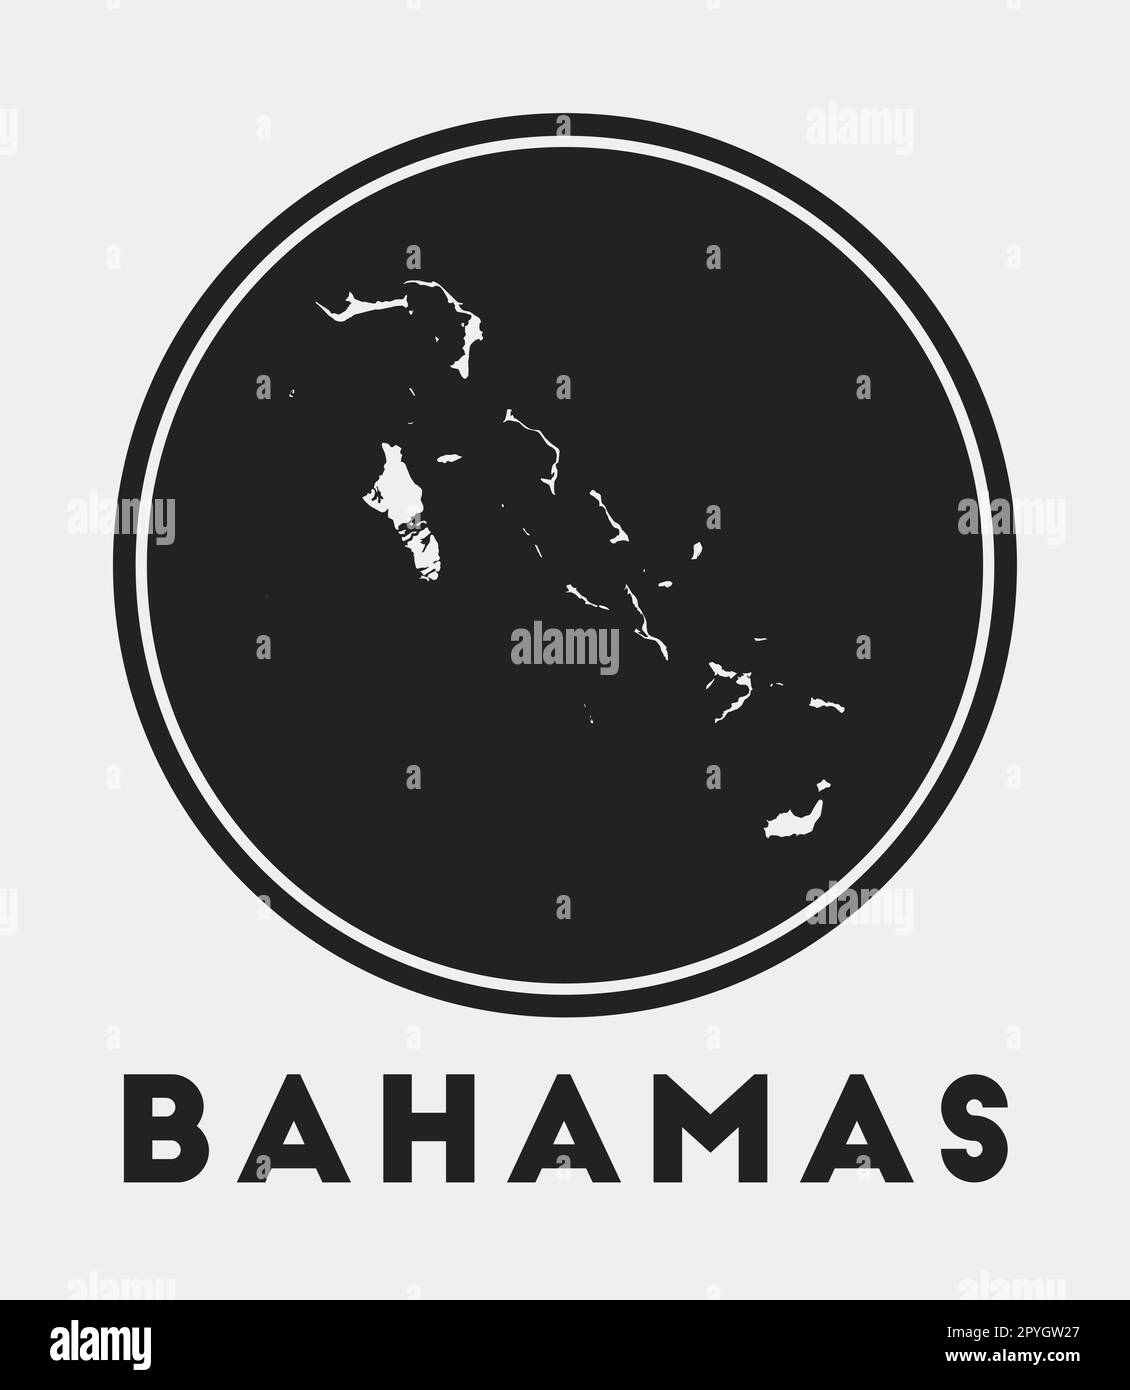 Bahamas icon. Round logo with country map and title. Stylish Bahamas badge with map. Vector illustration. Stock Vector